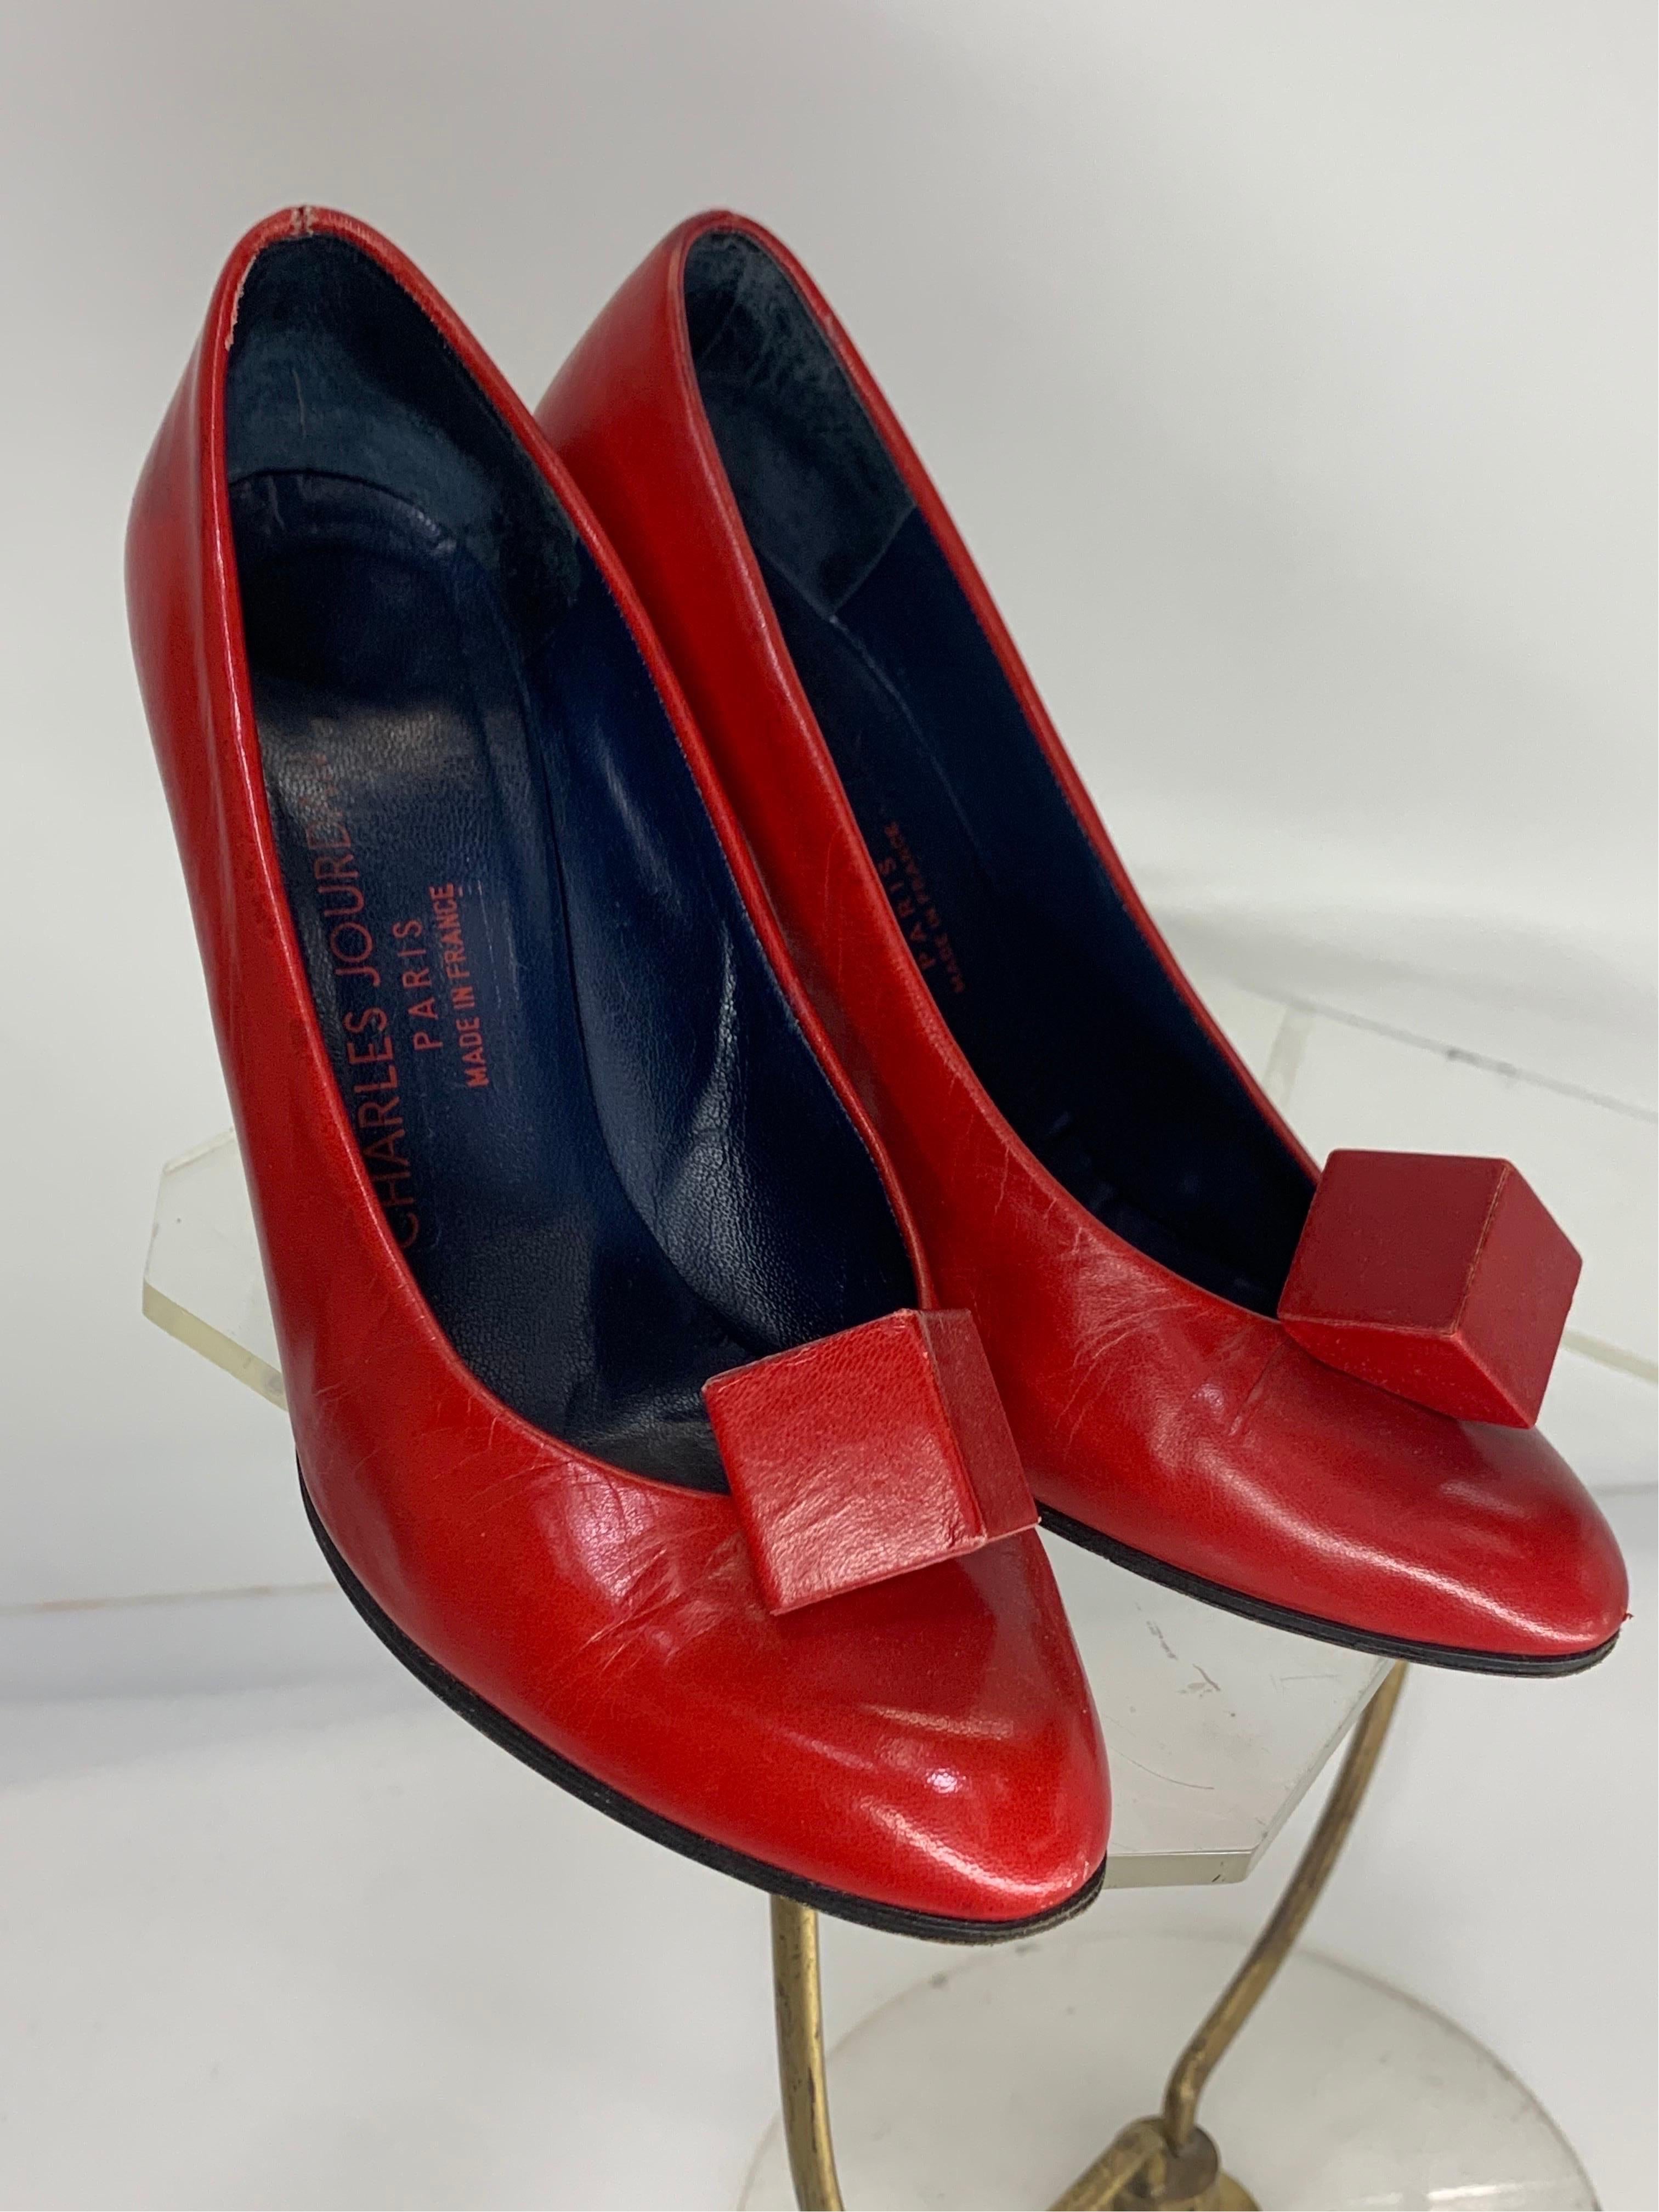 1970 Charles Jourdan Crimson Red High Heeled Pumps w/ Signature Cube Ornament For Sale 2